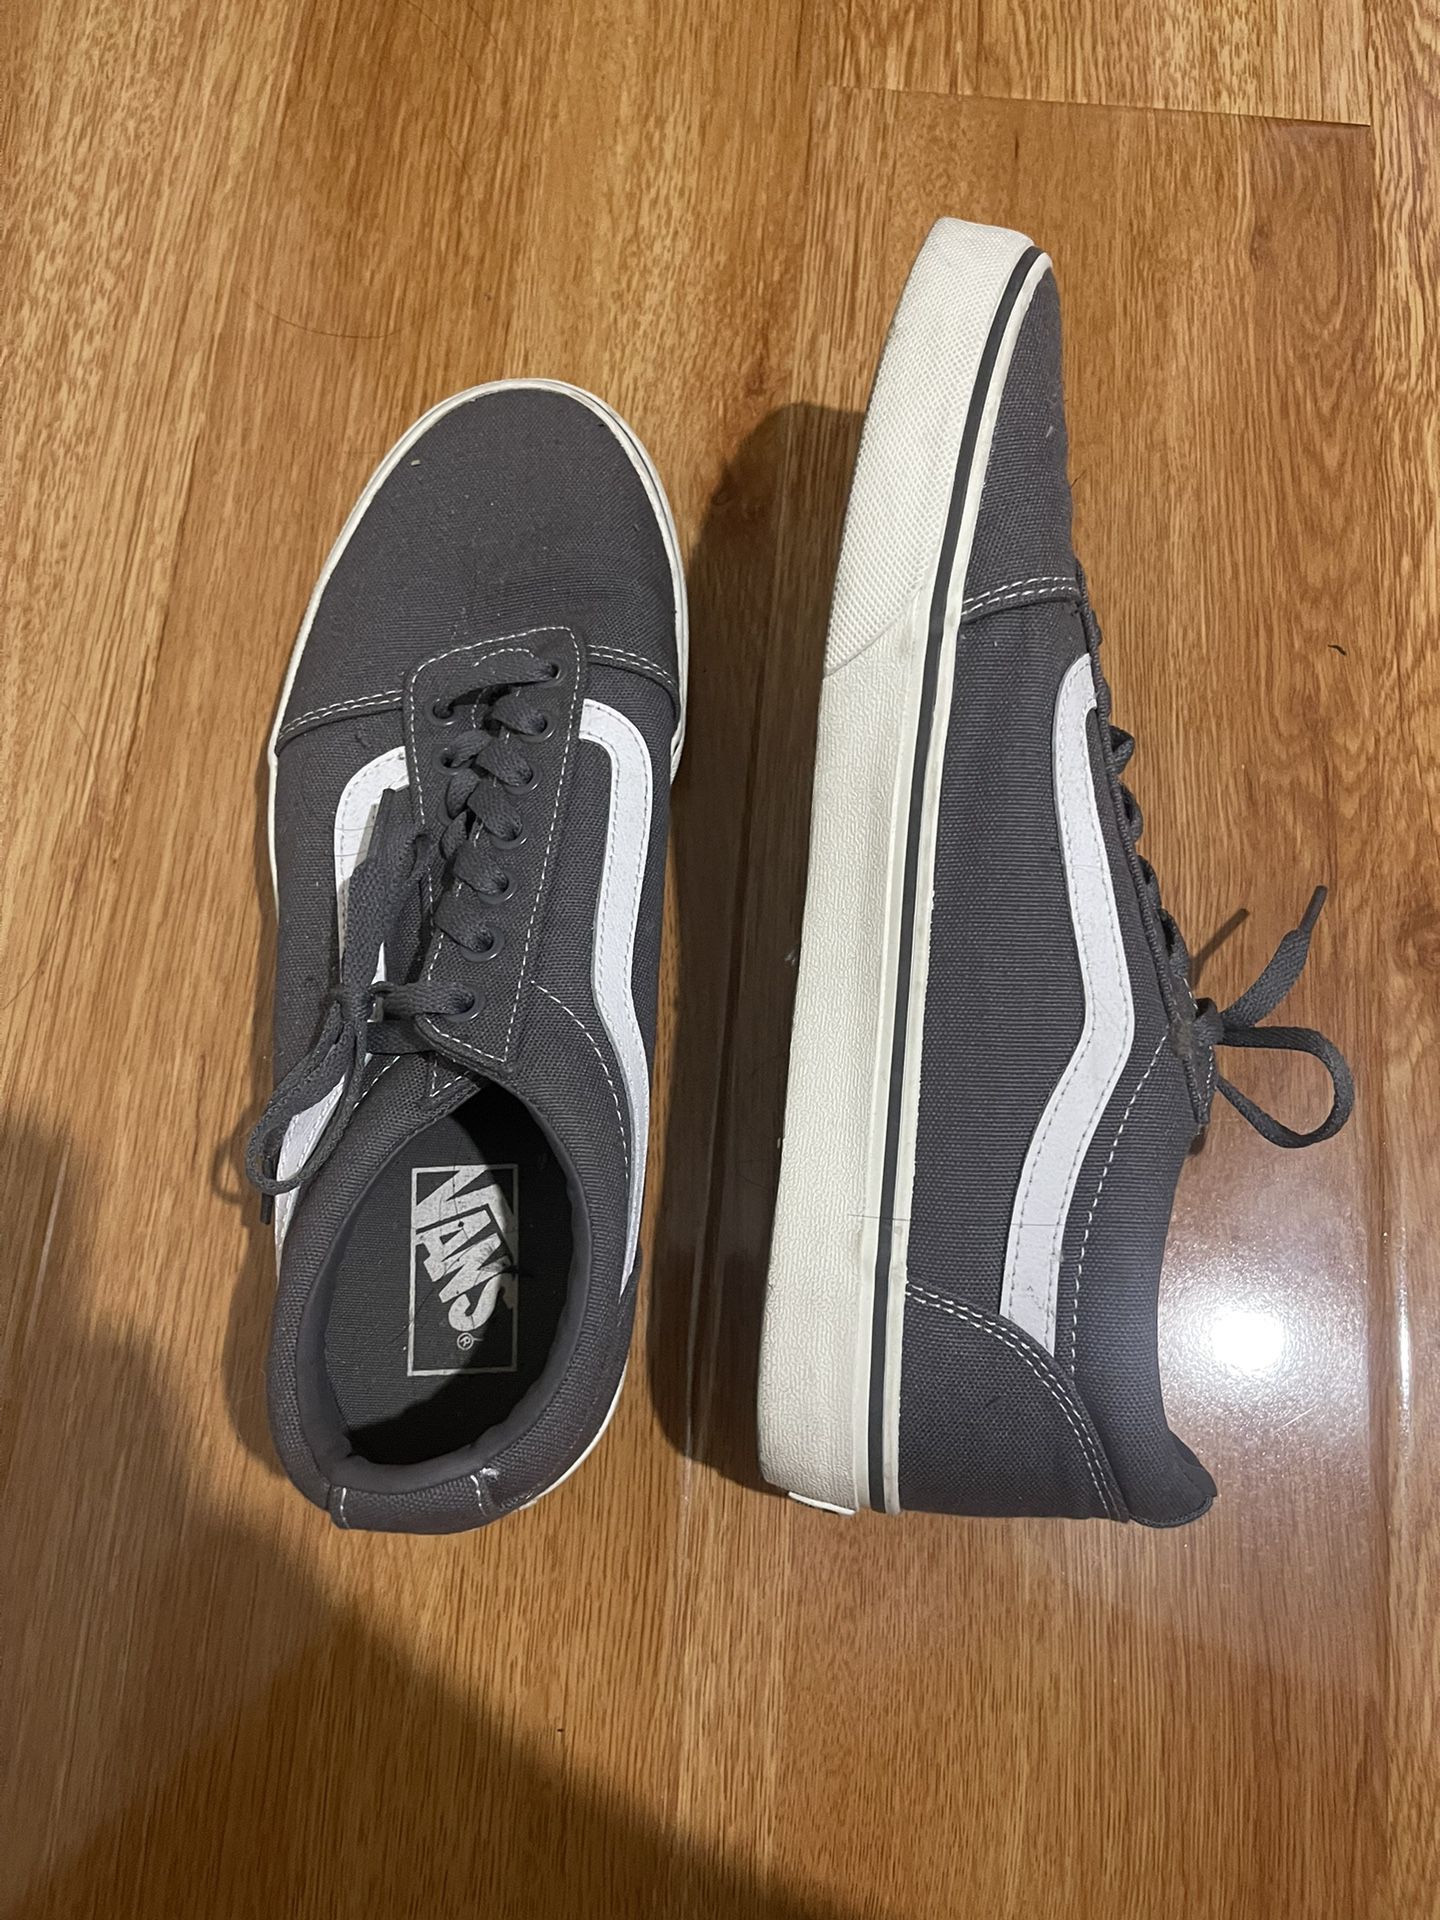 Selling shoes, grey vans, 4 nike shoes, and adidas.